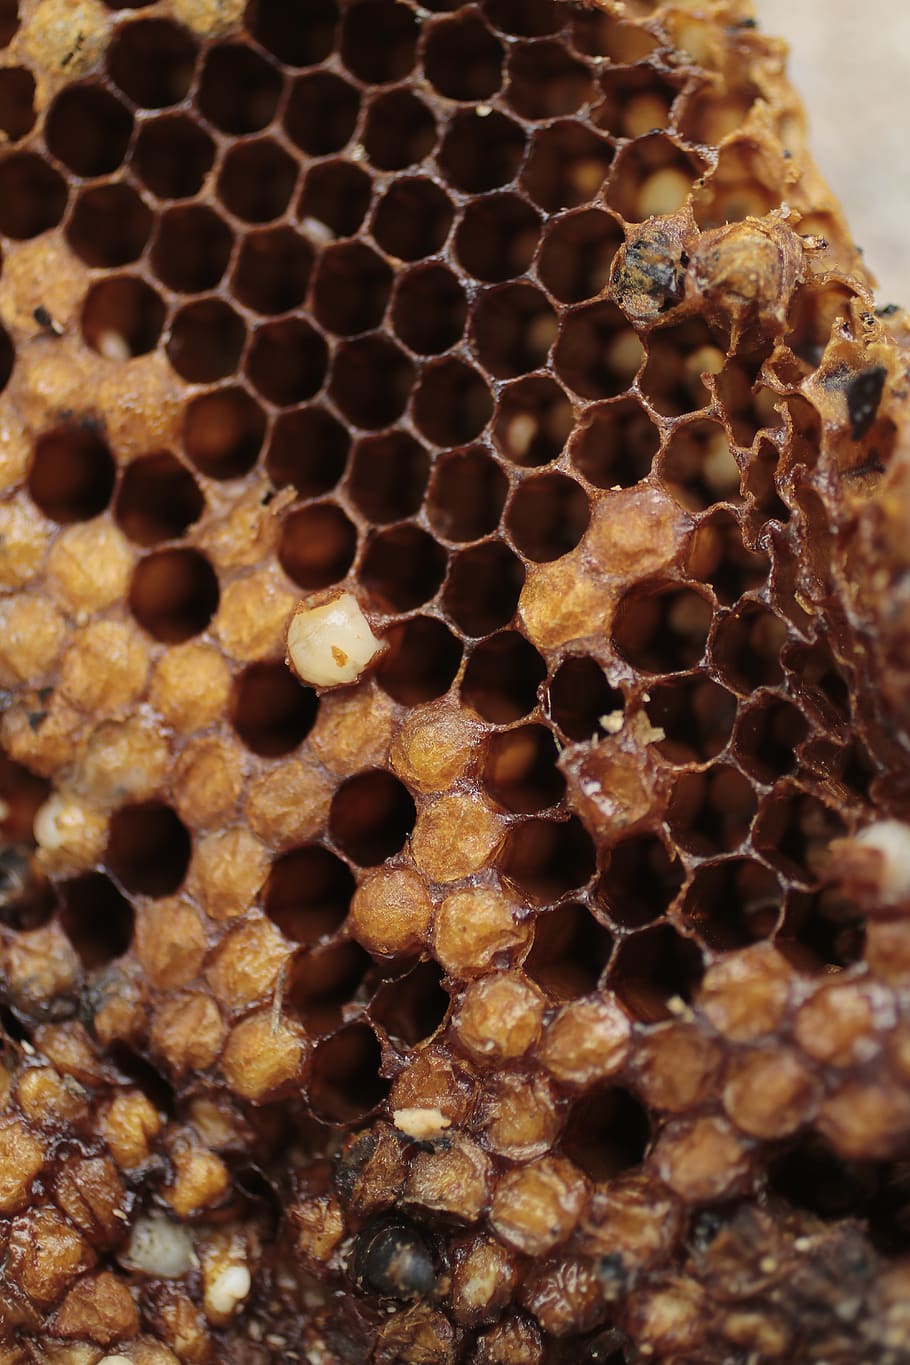 bee, input, diaper, ivy, honeycomb, close-up, beehive, apiculture, pattern, animals in the wild